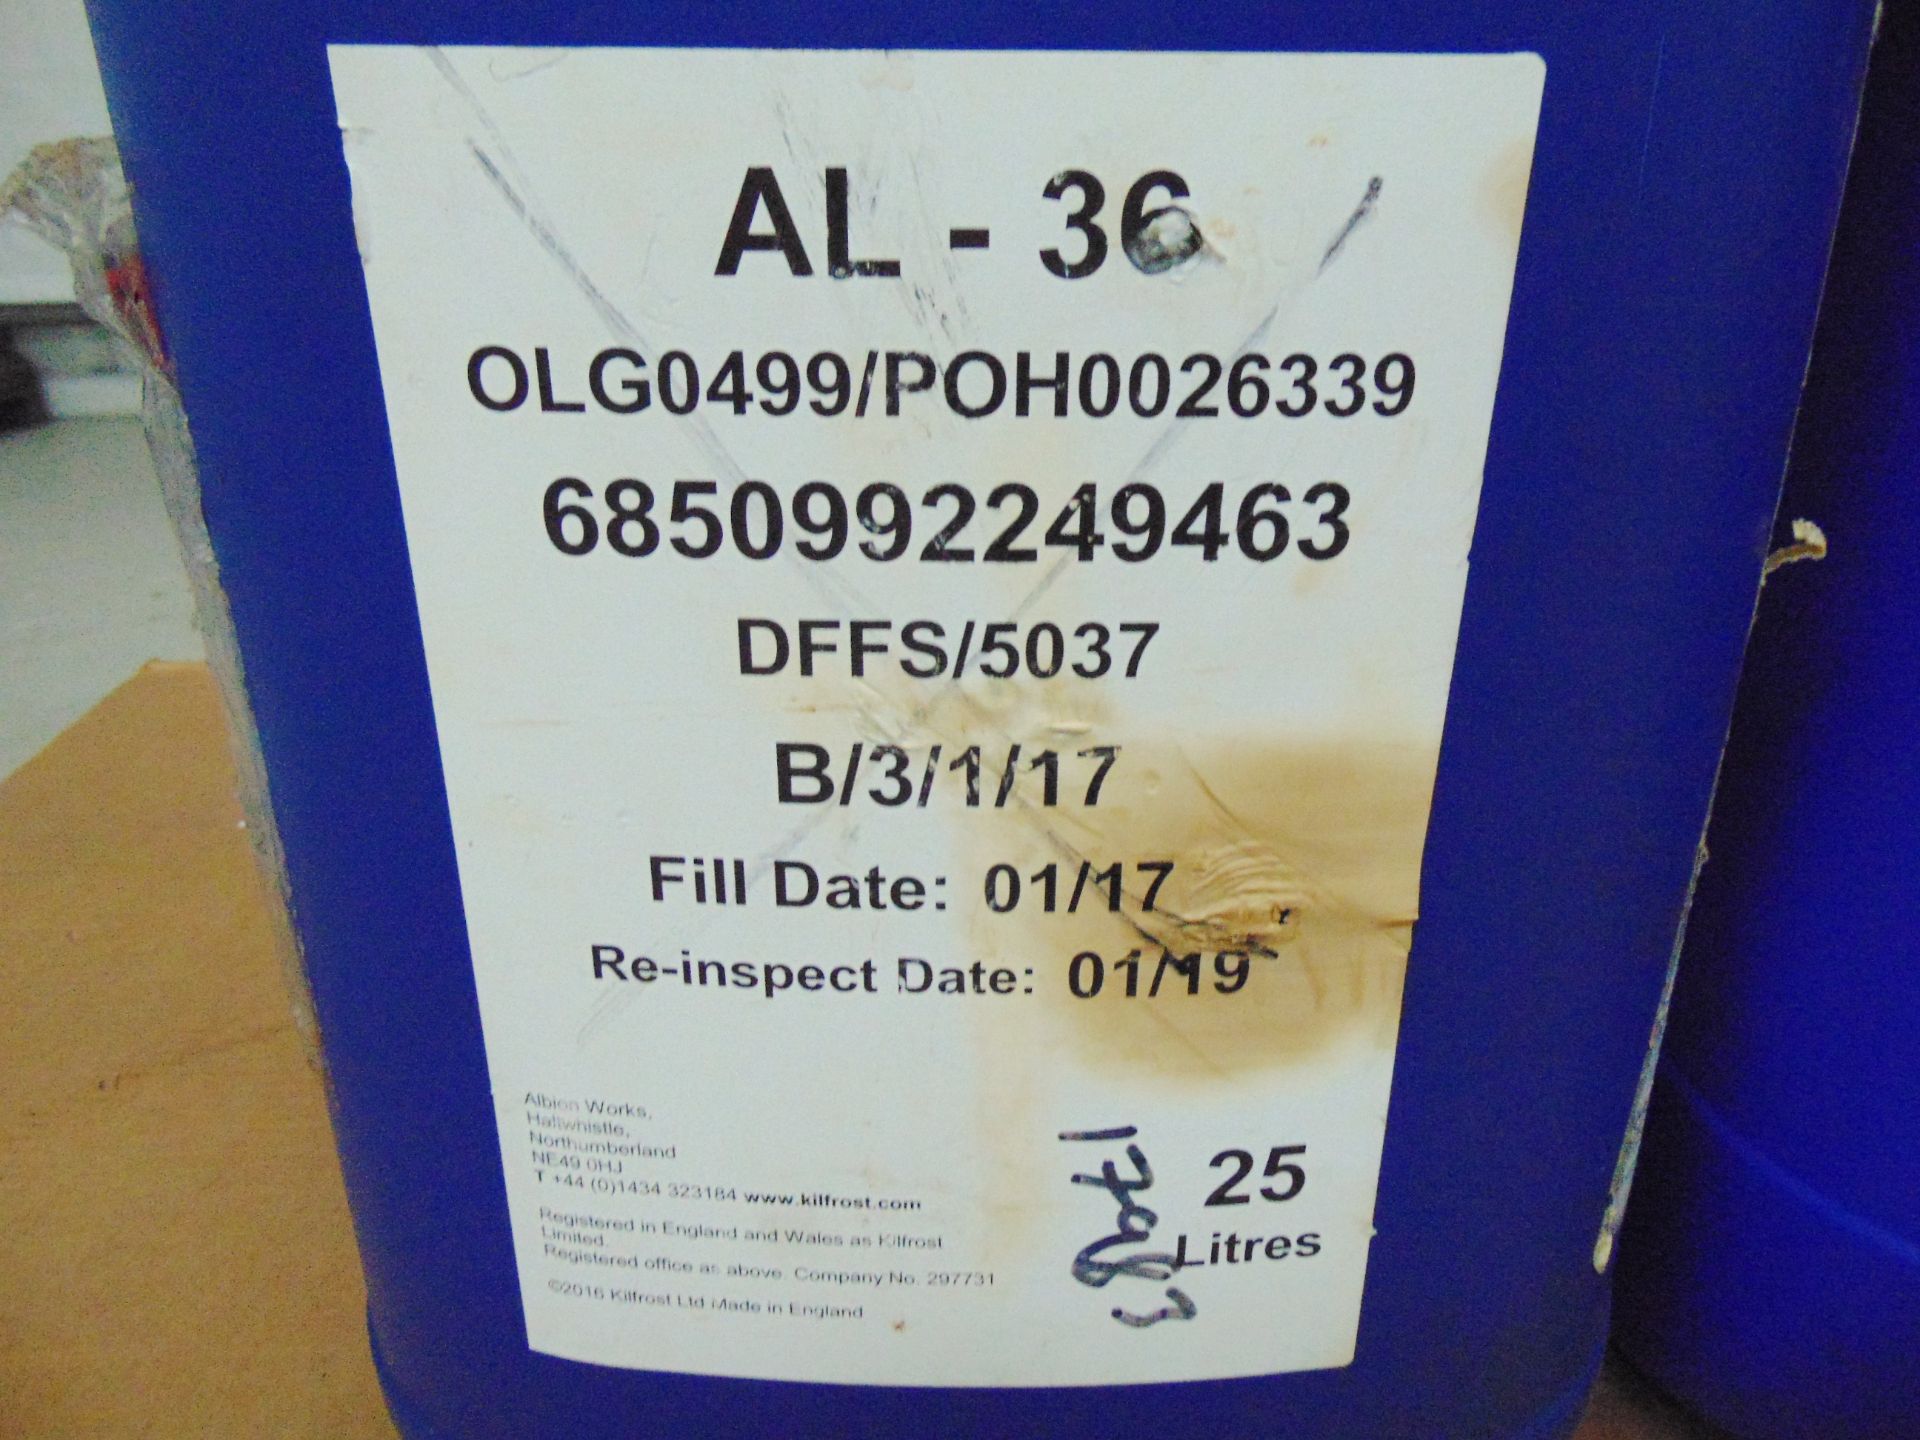 2 x Unissued 25L Tubs of Kilfrost AL-36 Aircraft Windscreen Washer & De-Icer - Image 2 of 3